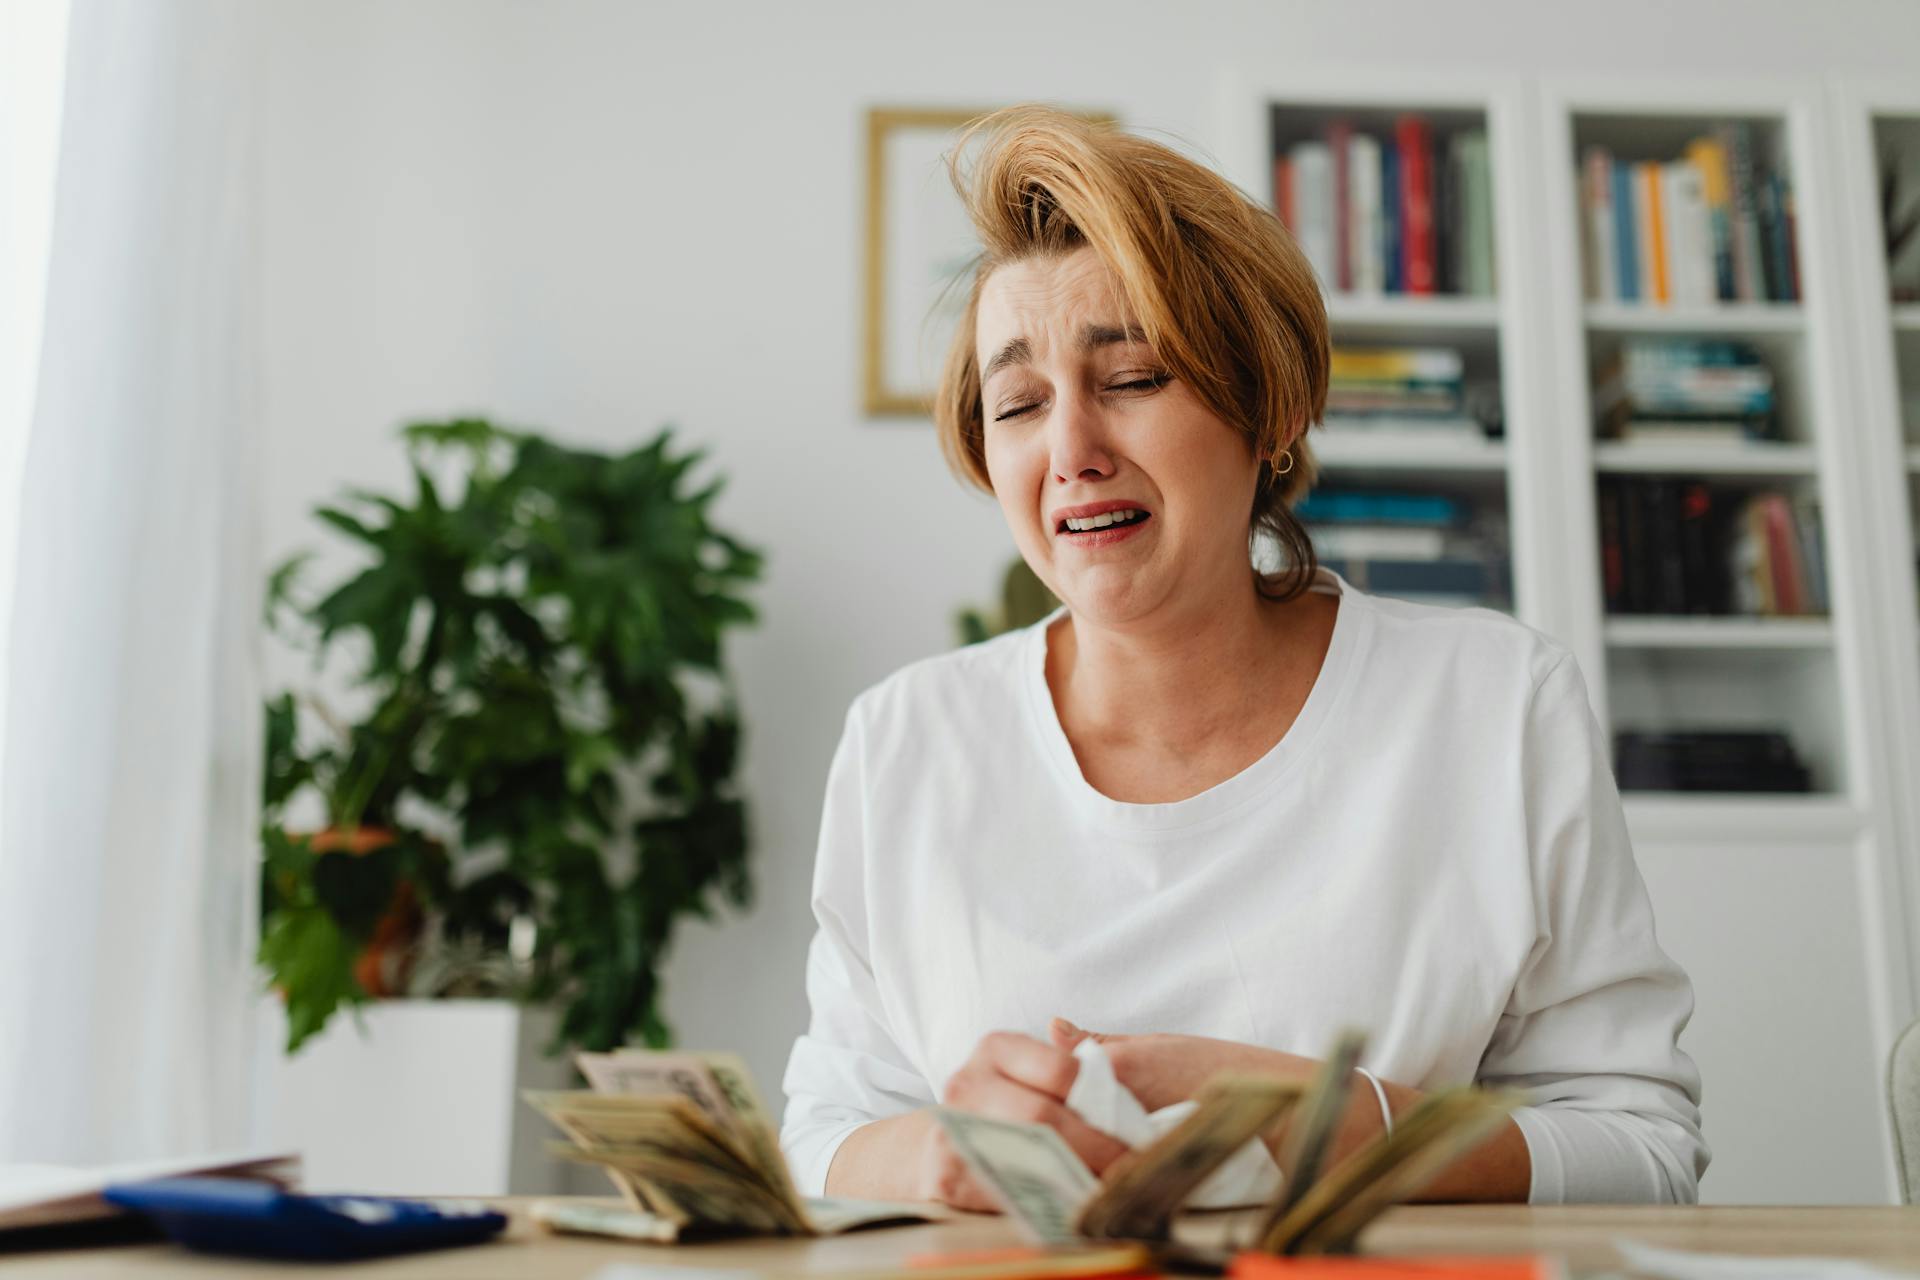 A woman counting money and crying | Source: Pexels